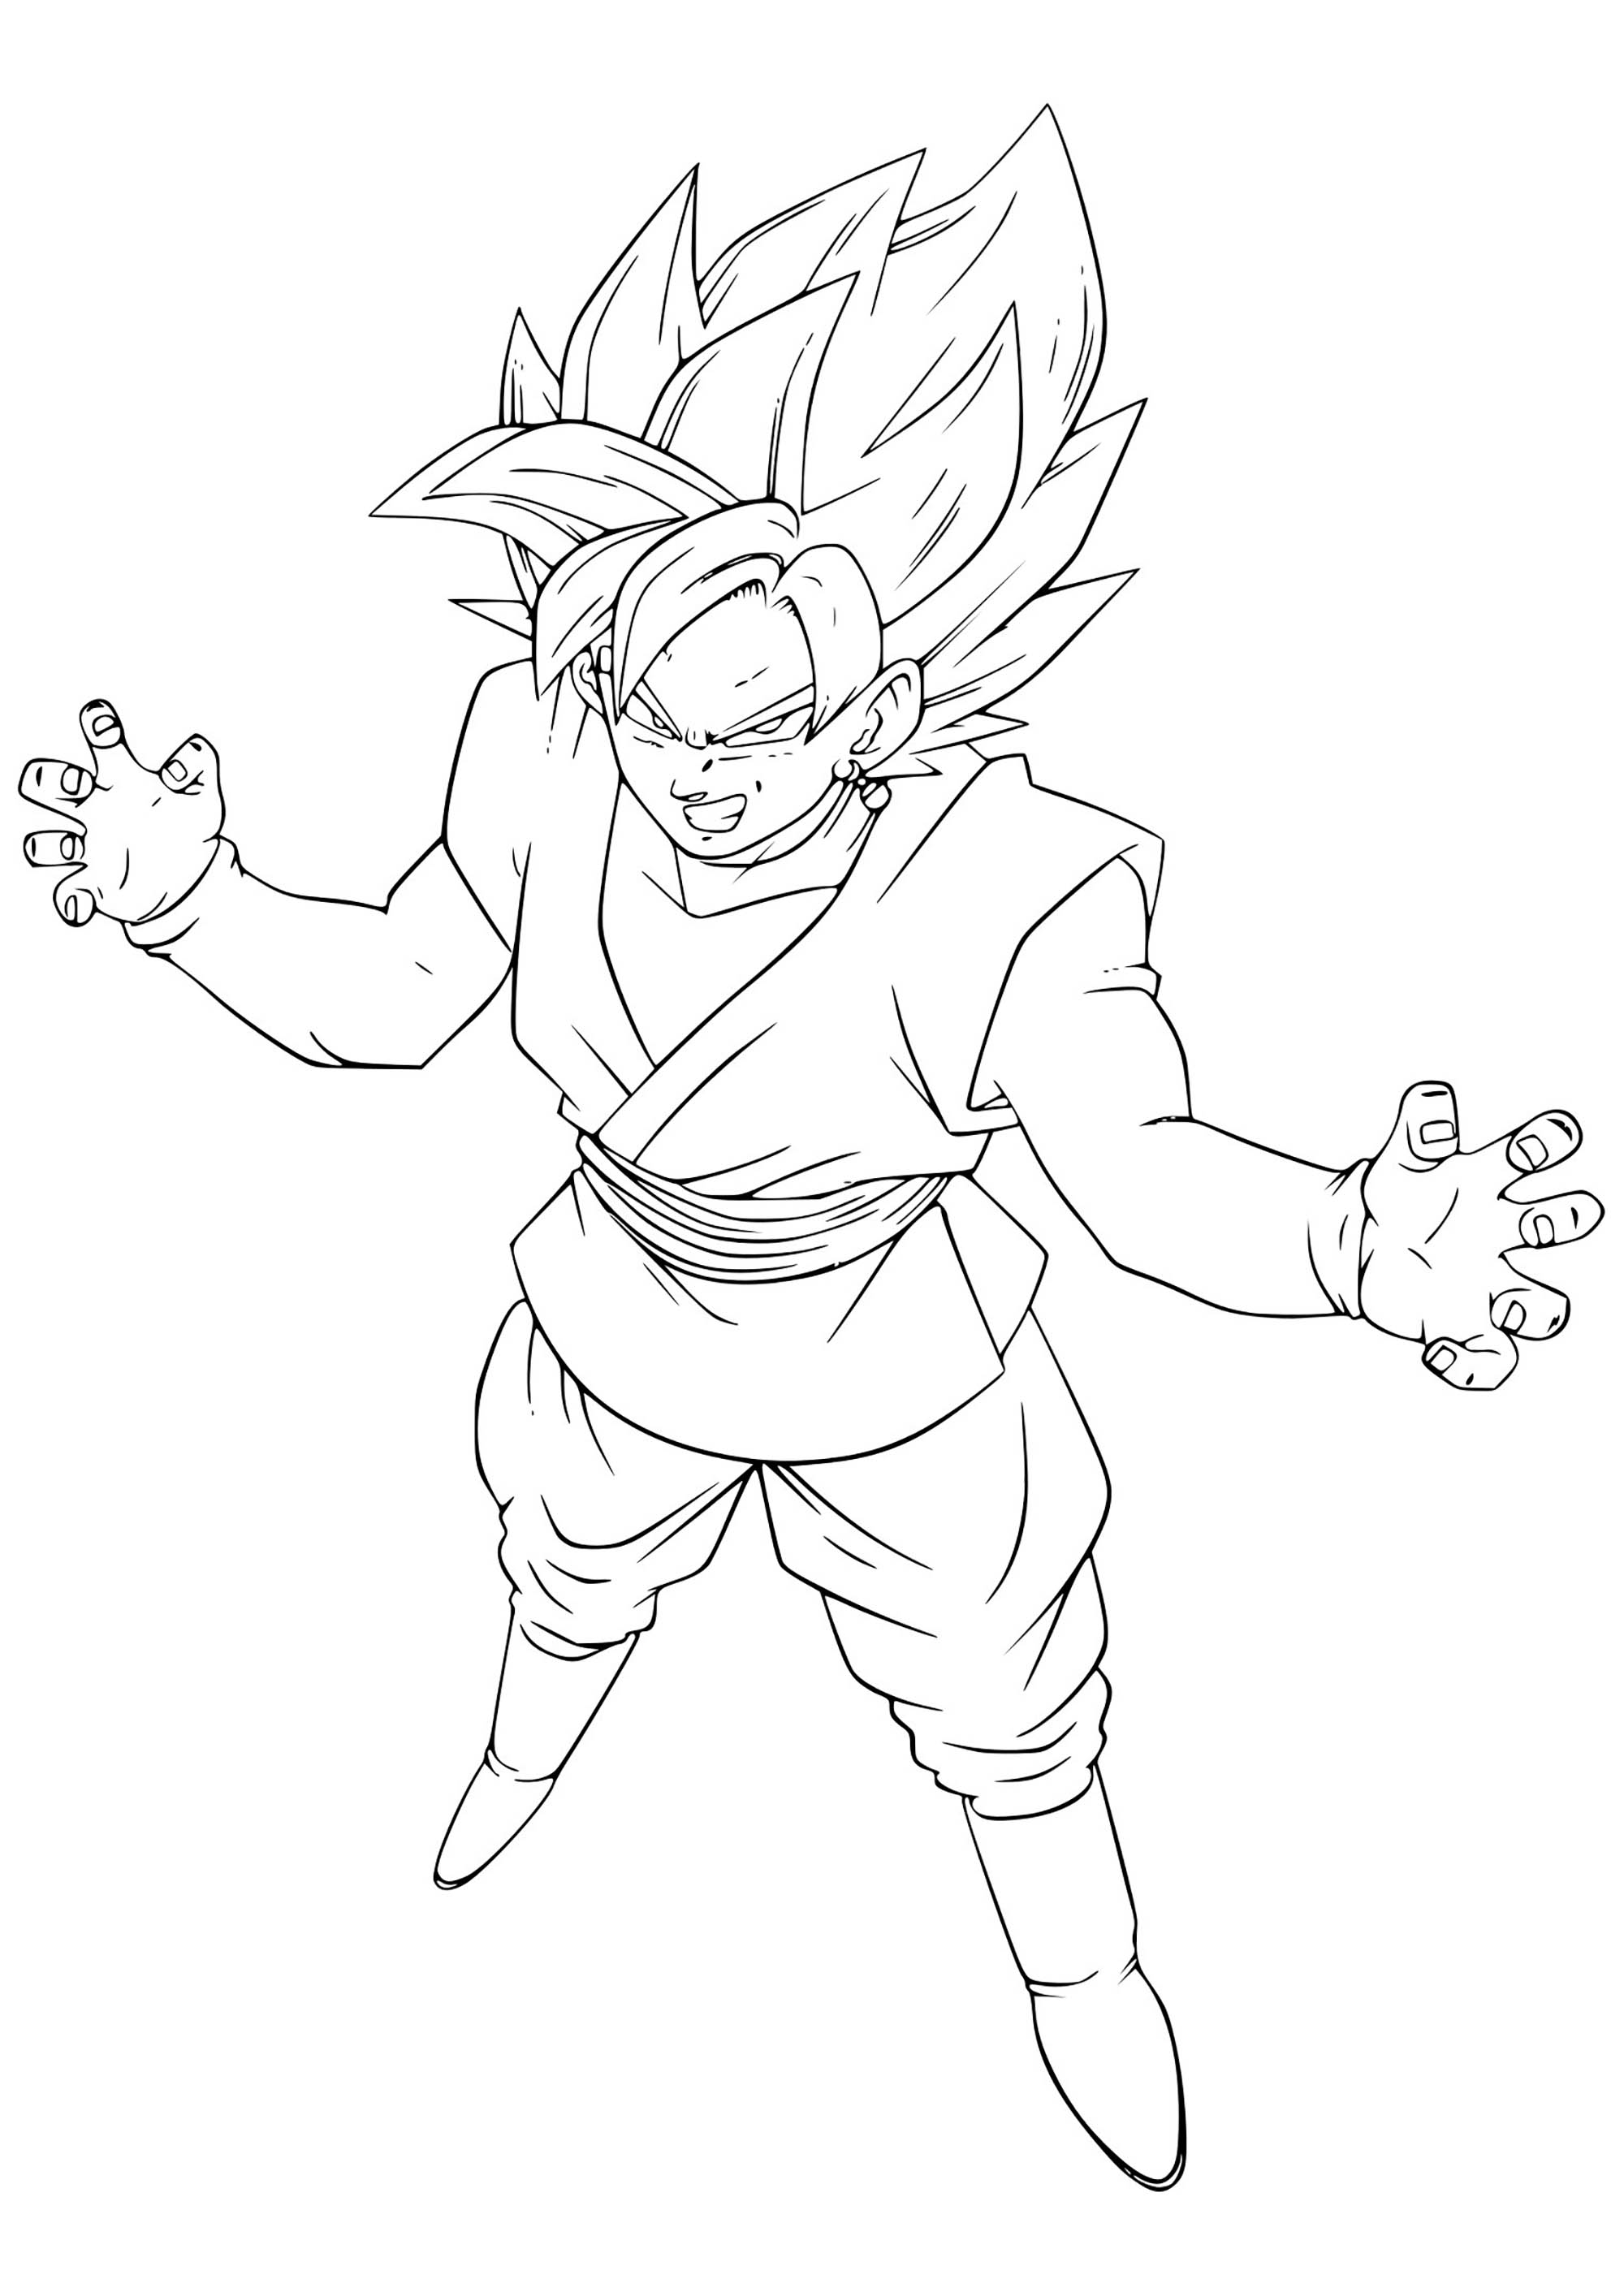 321 Goku - Free Colouring Pages